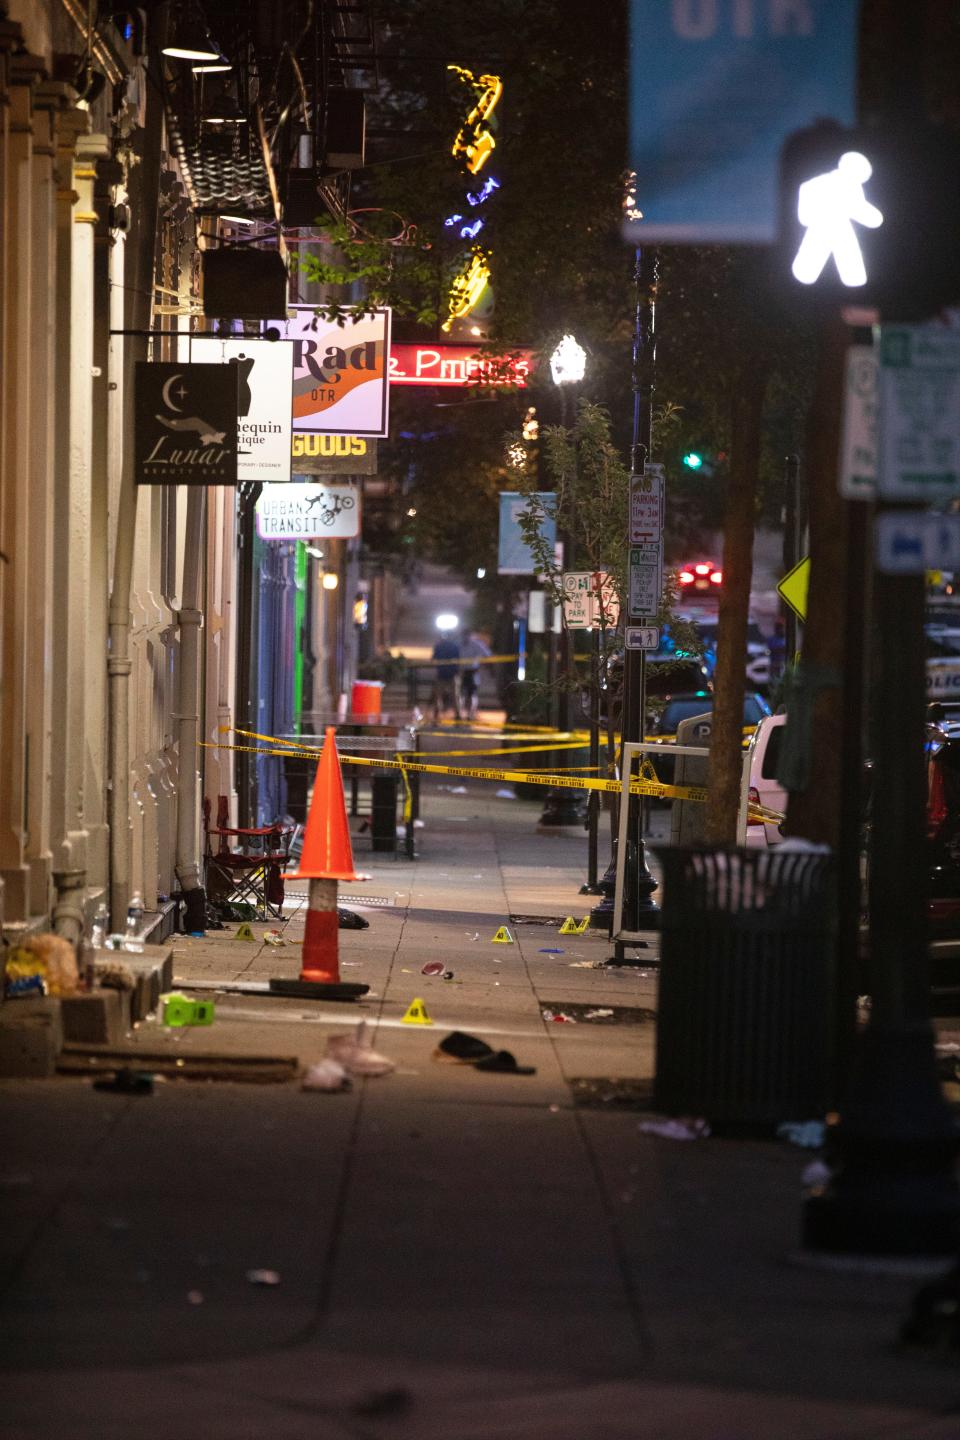 North of Downtown Cincinnati, Over-the-Rhine has historically seen more crime than most other neighborhoods. In August 2022, a mass shooting near Mr. Pitiful's on Main Street left nine people injured.